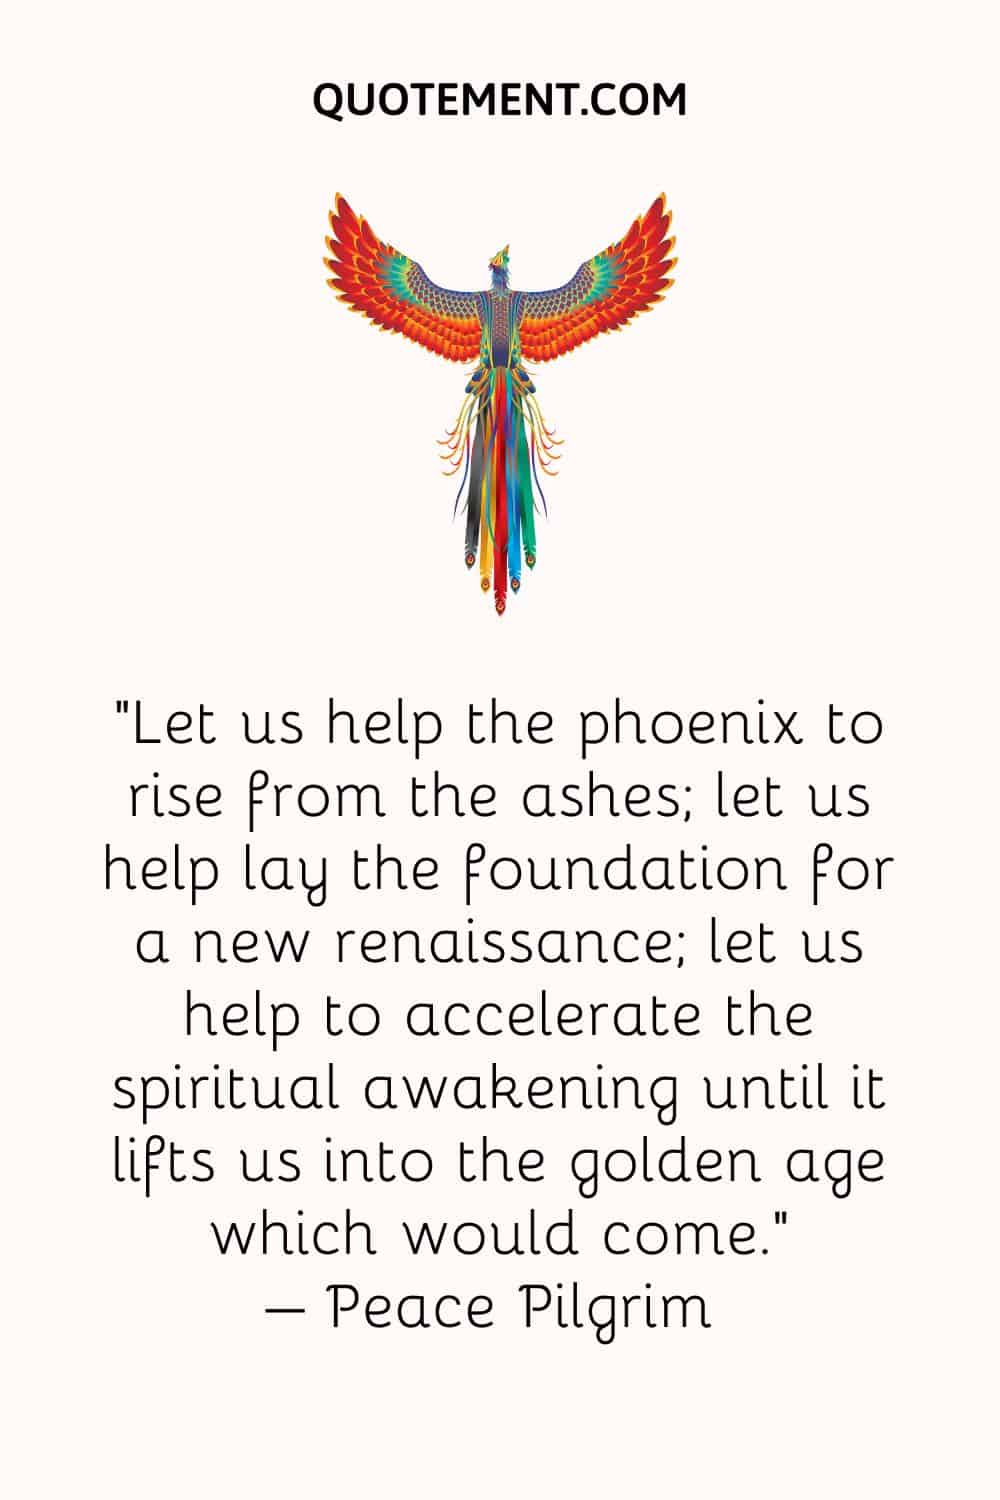 Illustration representing inspirational rising from the ashes quote and phoenix.